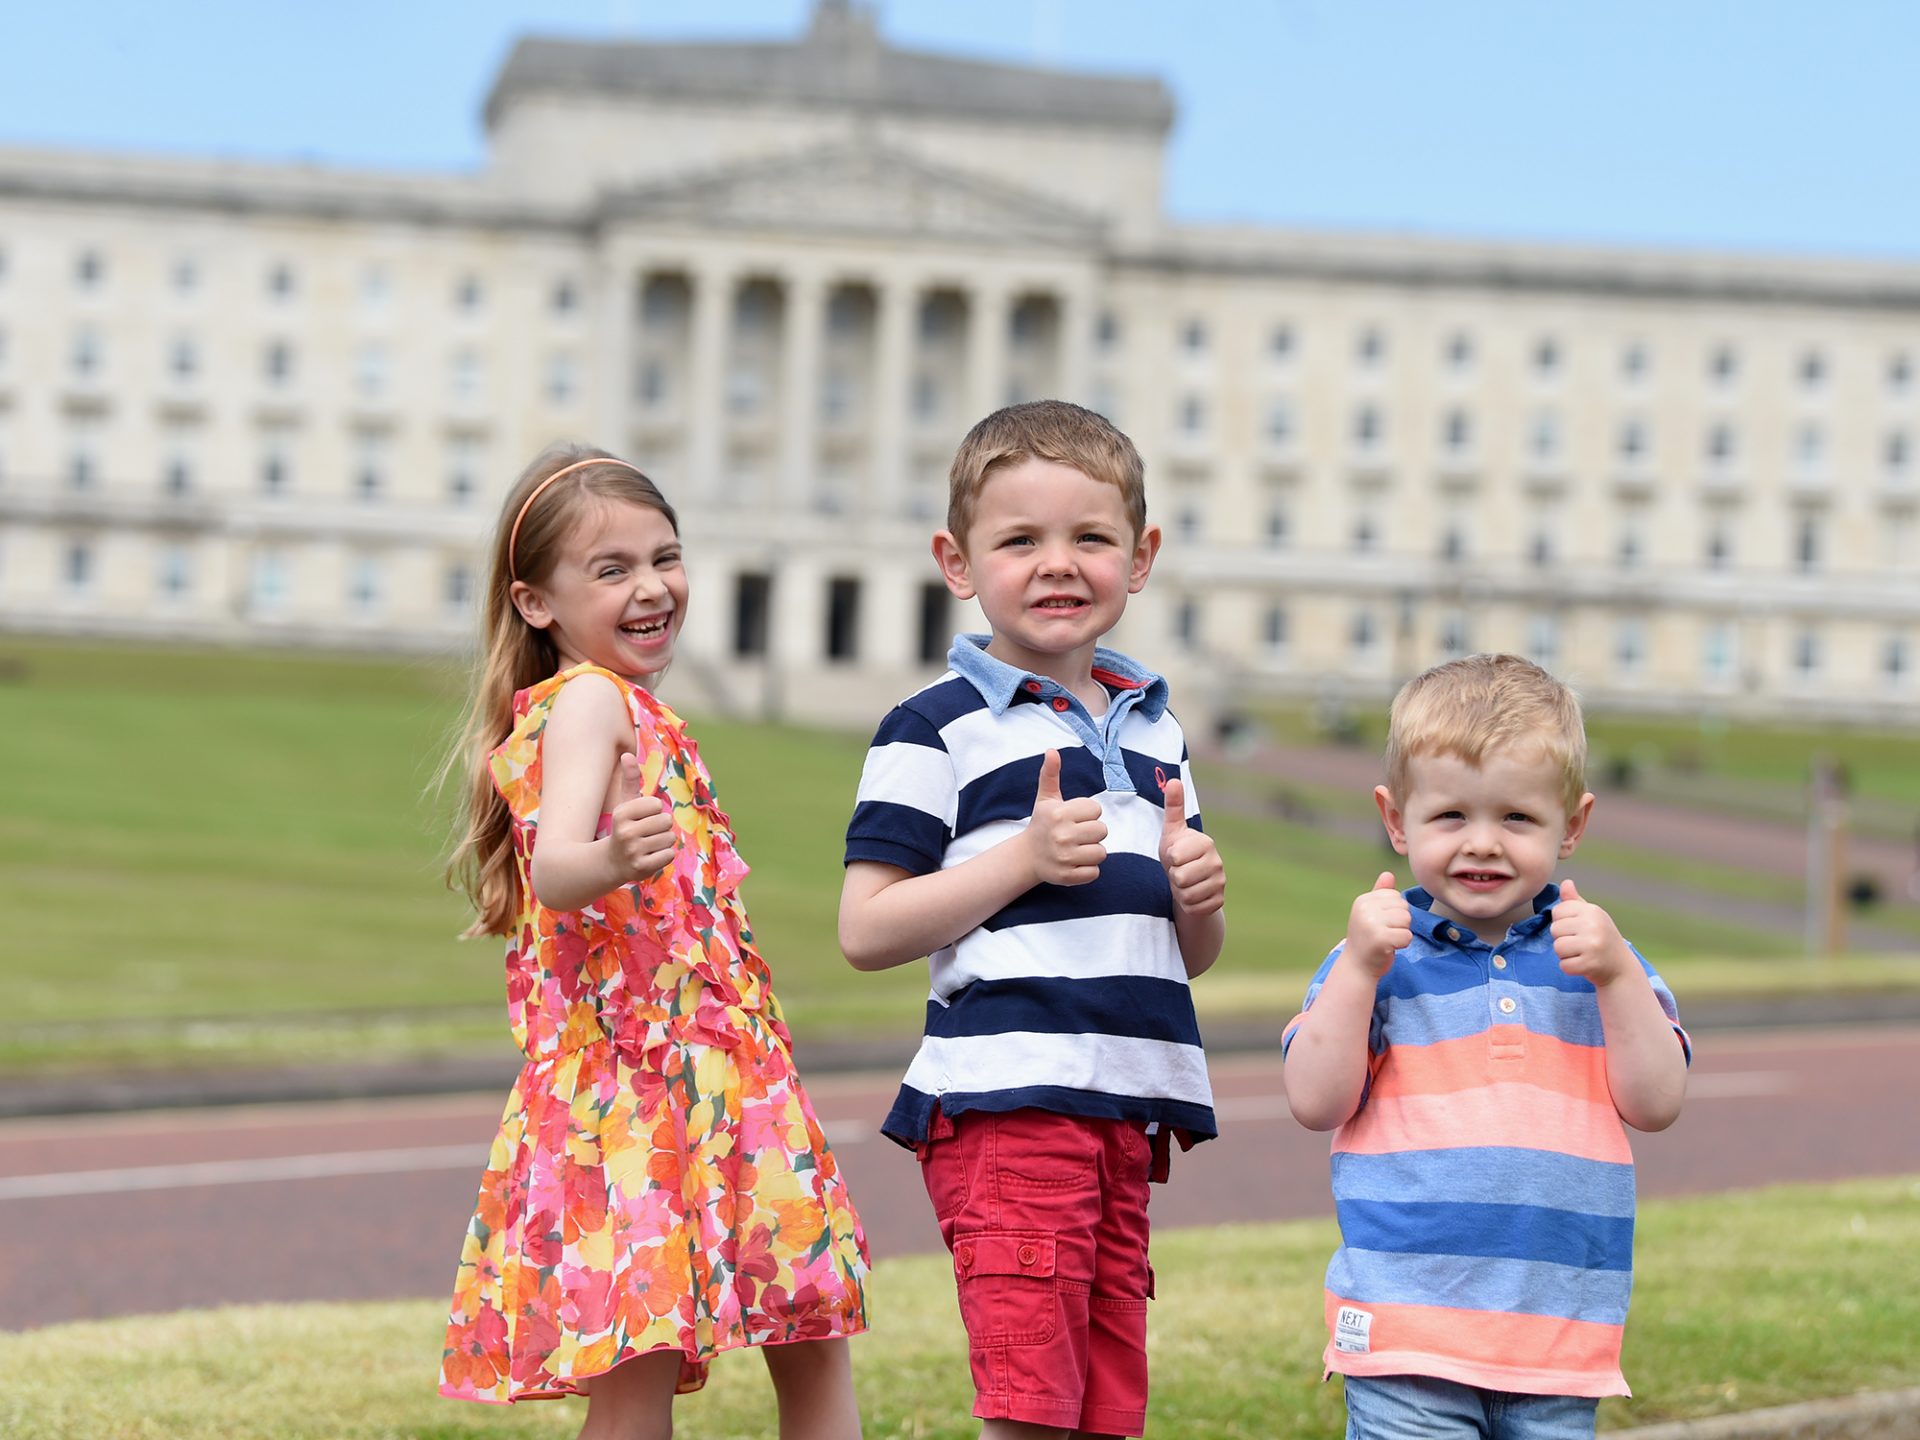 Employers For Childcare publishes its Policy Manifesto ahead of the 2022 Northern Ireland Assembly election